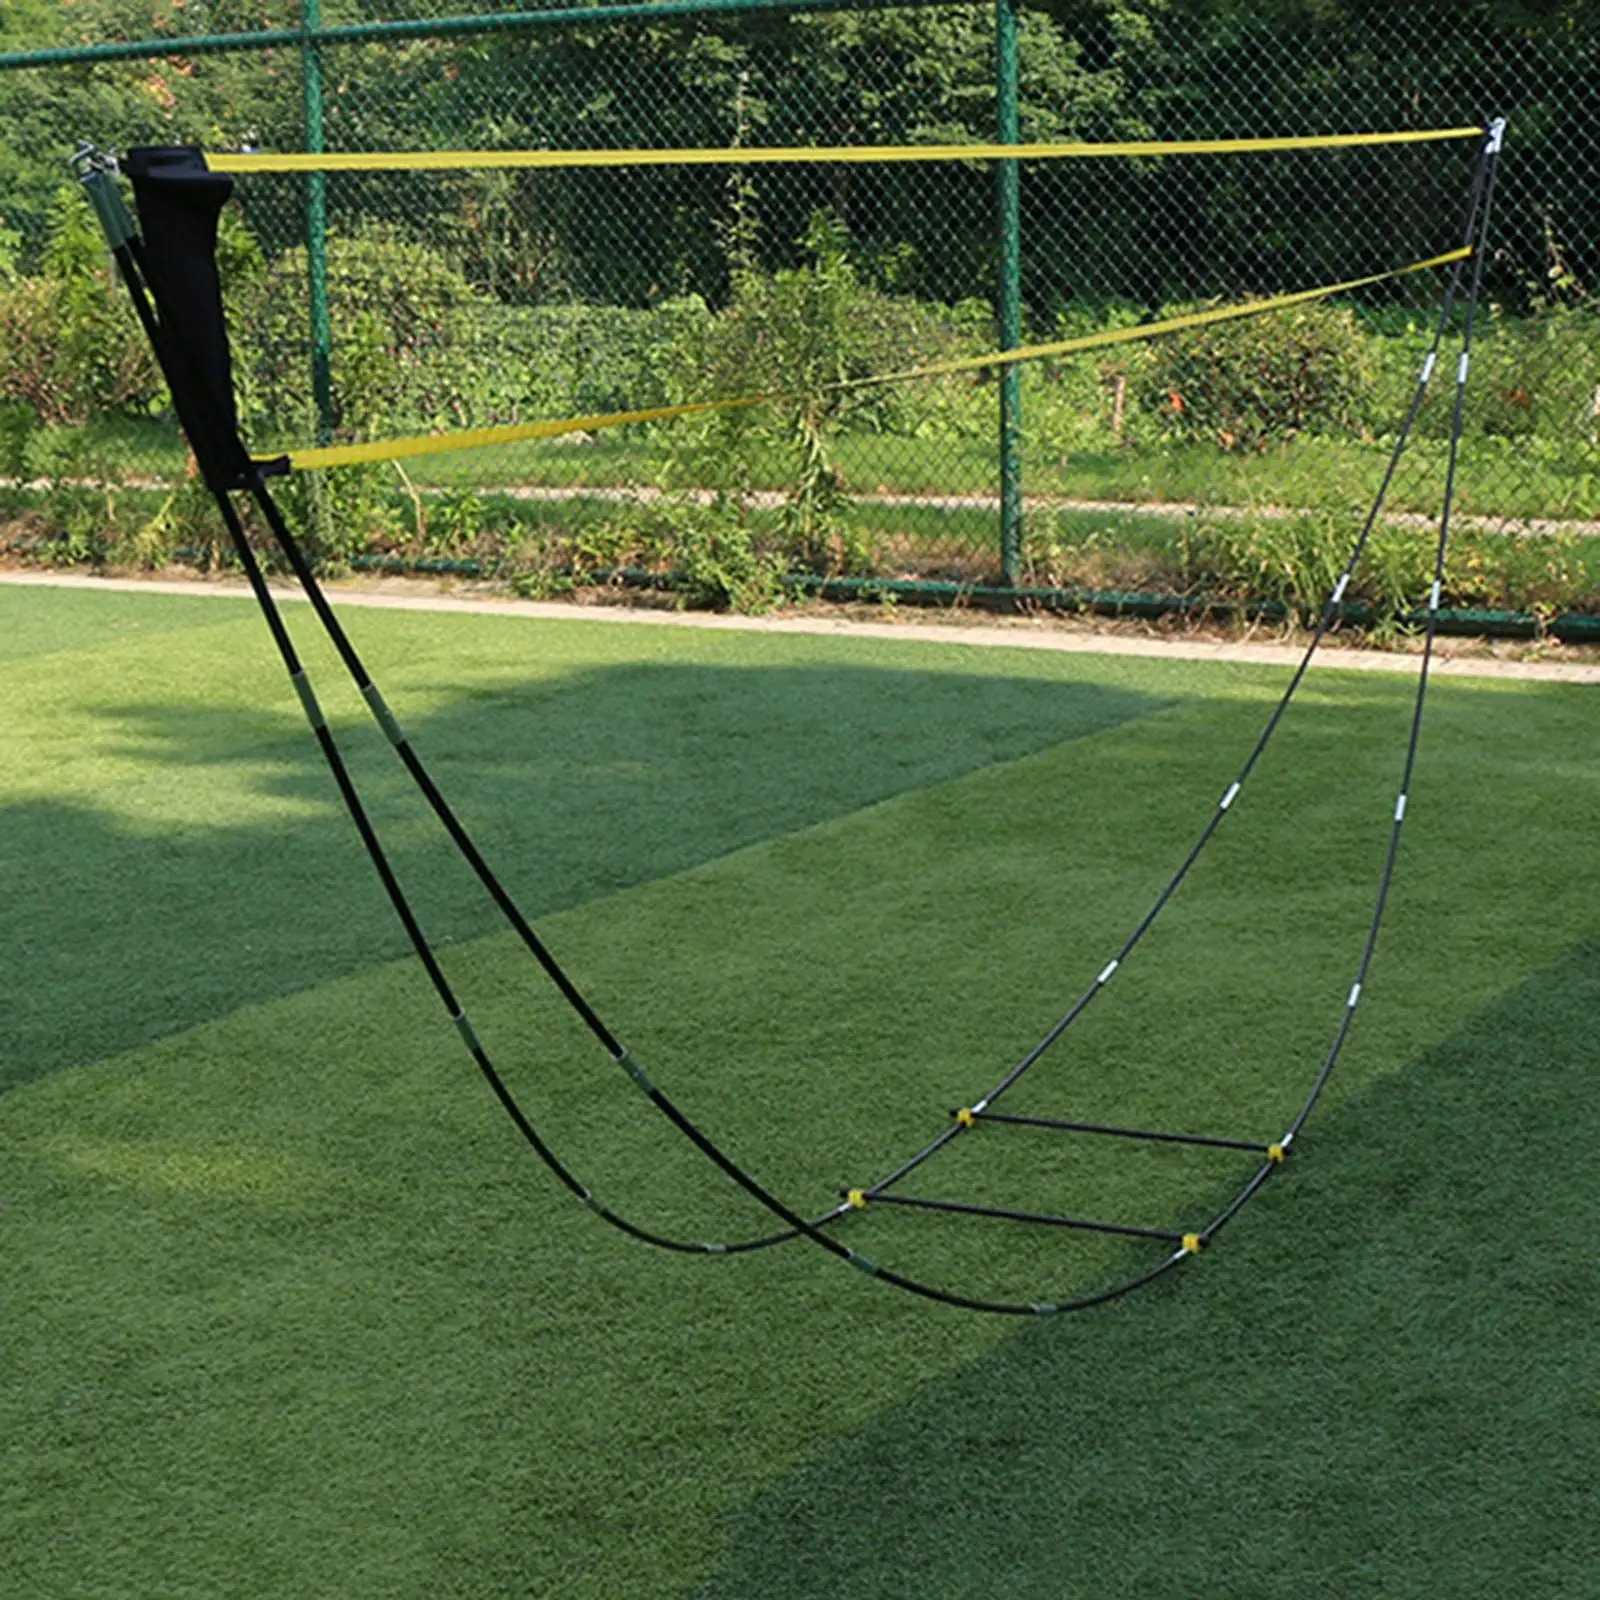 Portable Badmintonwith Stand Carry Bag, Folding Volleyball Tennis Badminton Net ? Easy Setup,  or Stakes Required